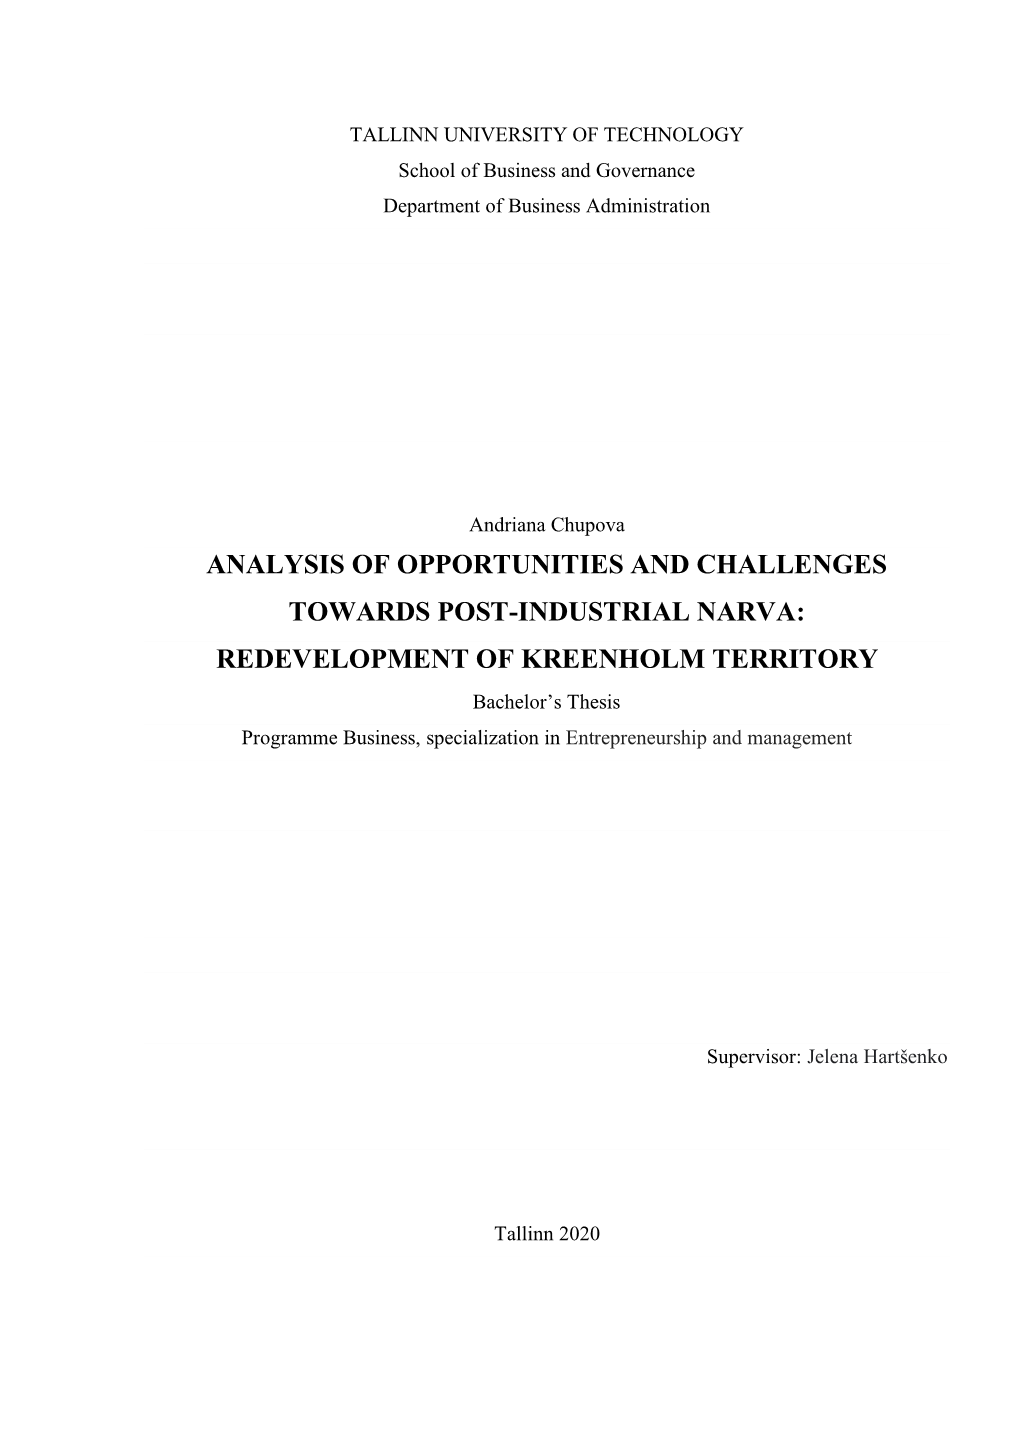 Analysis of Opportunities and Challenges Towards Post